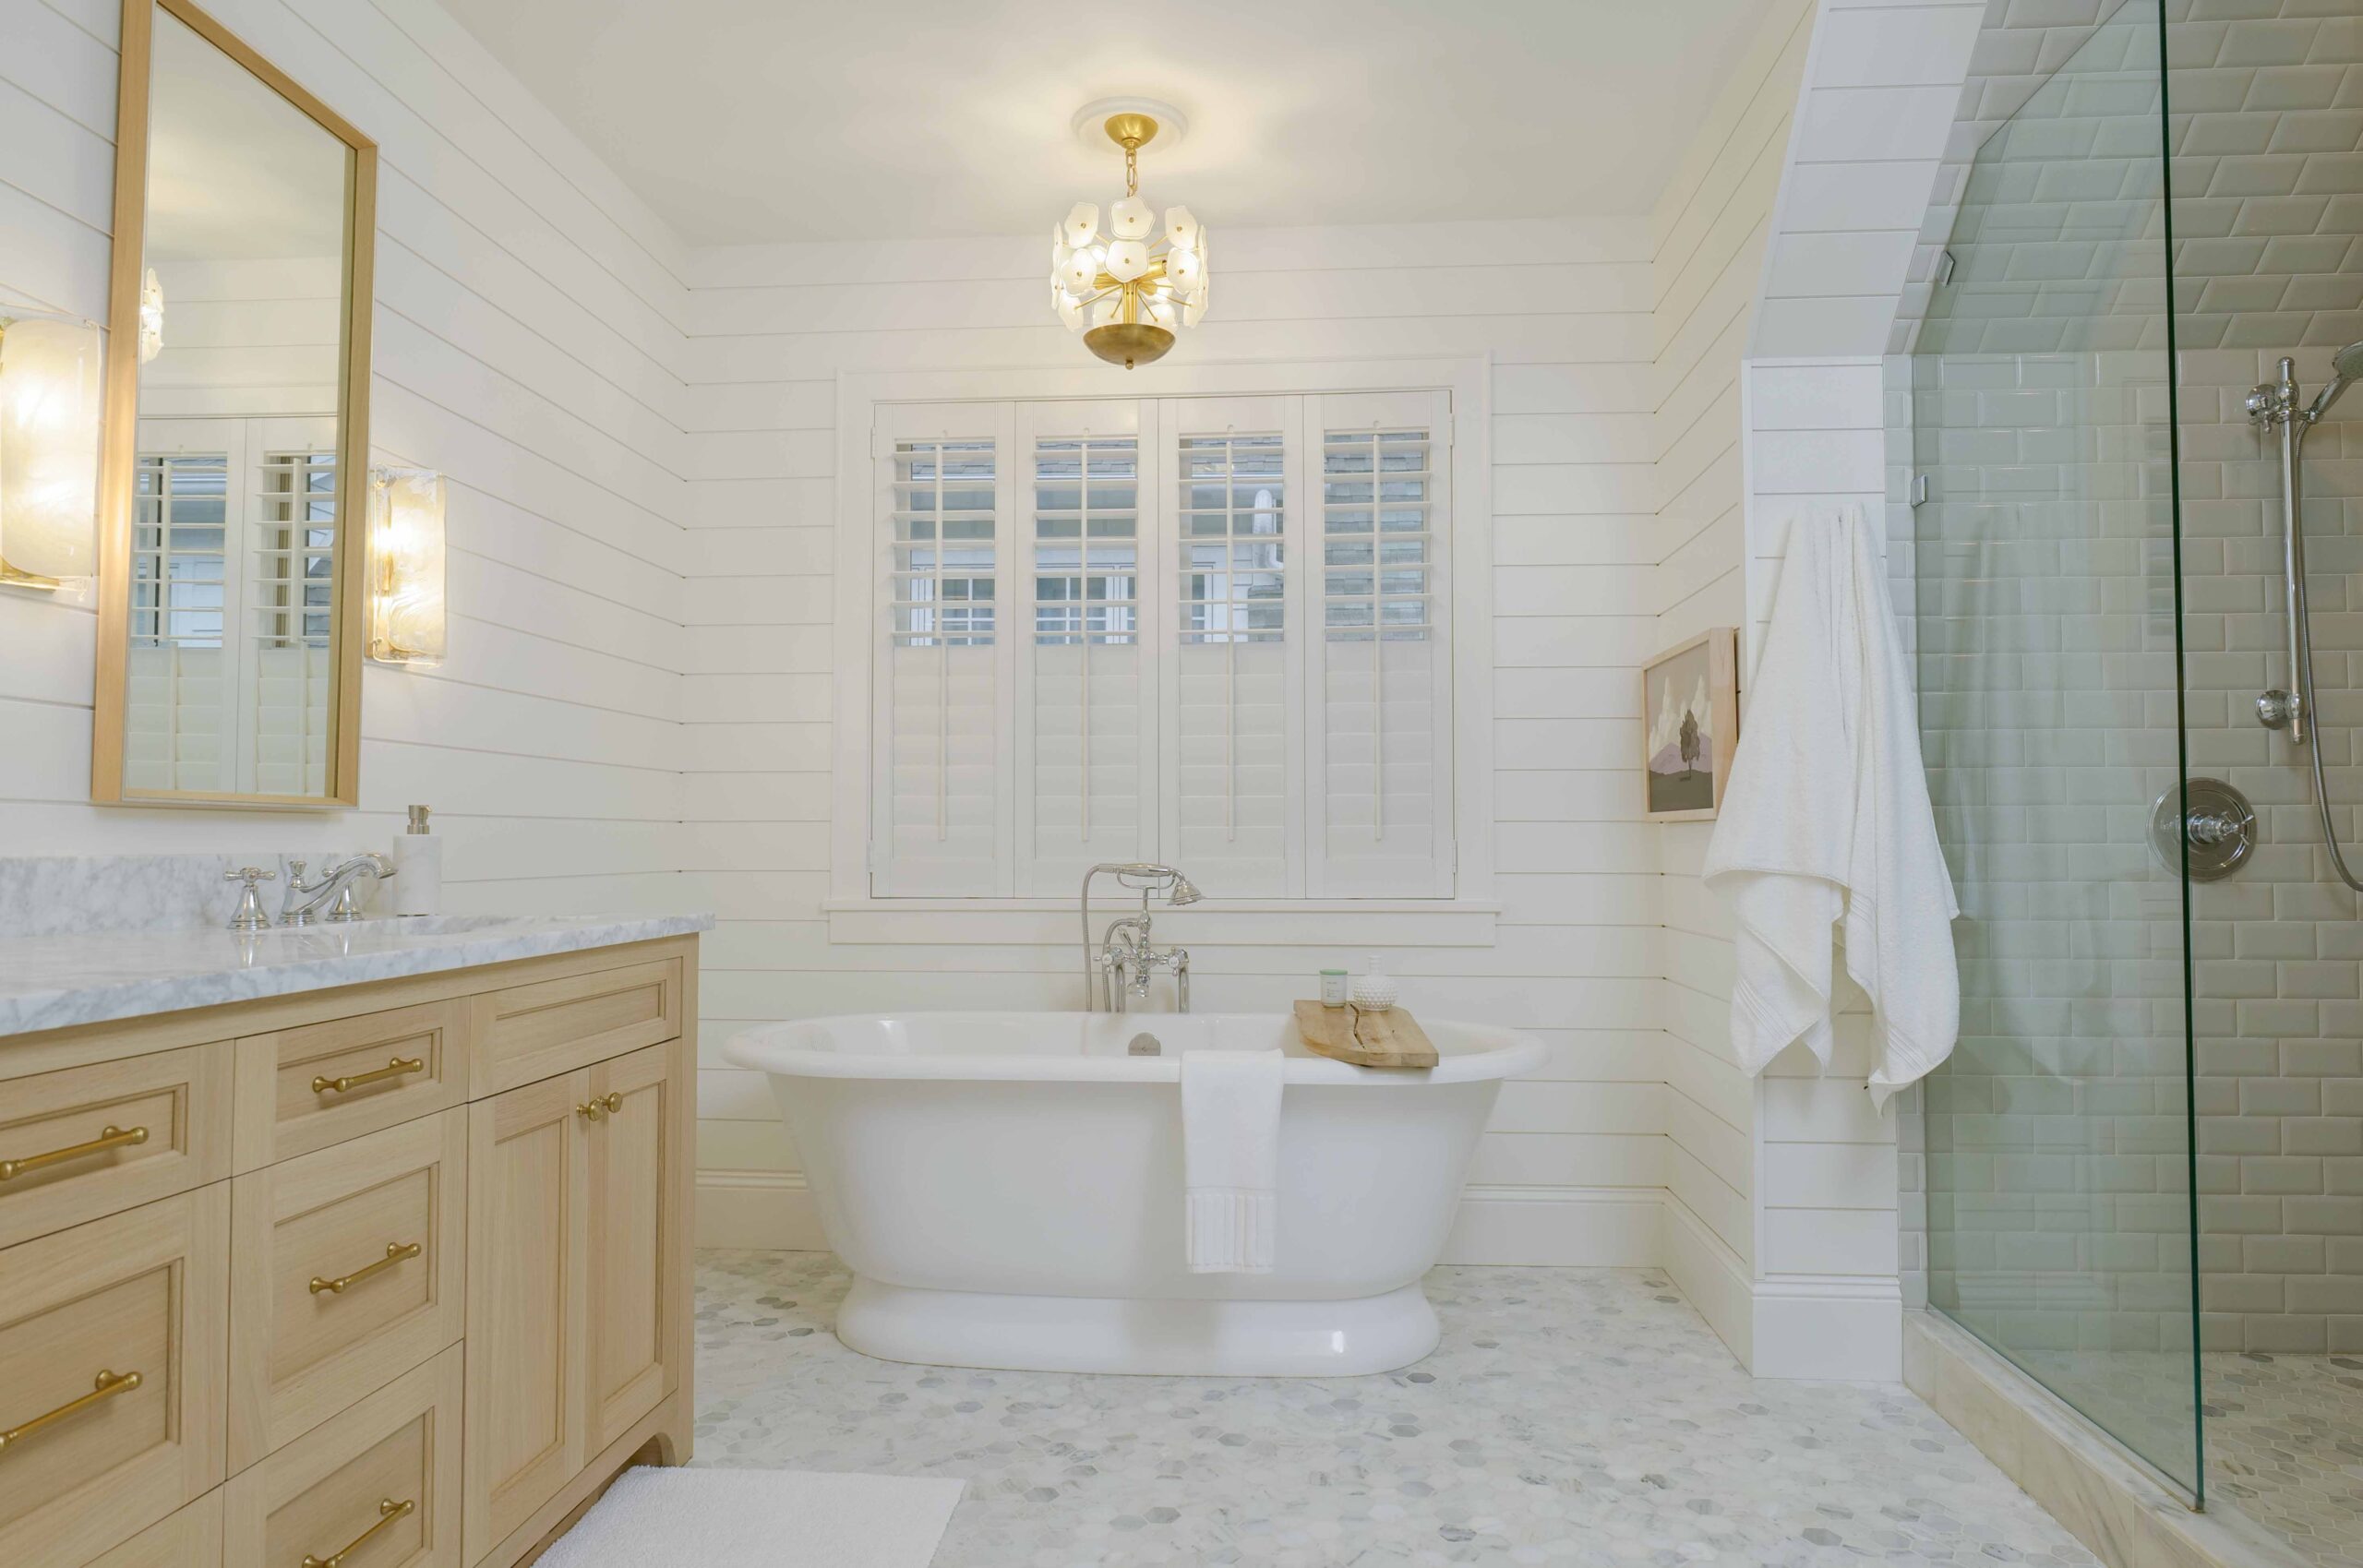 A light and airy bathroom, part of the Upton Avenue Fire Remodel, featuring a wooden vanity, a freestanding bathtub, a glass-enclosed shower, white shiplap walls, and a hanging light fixture.